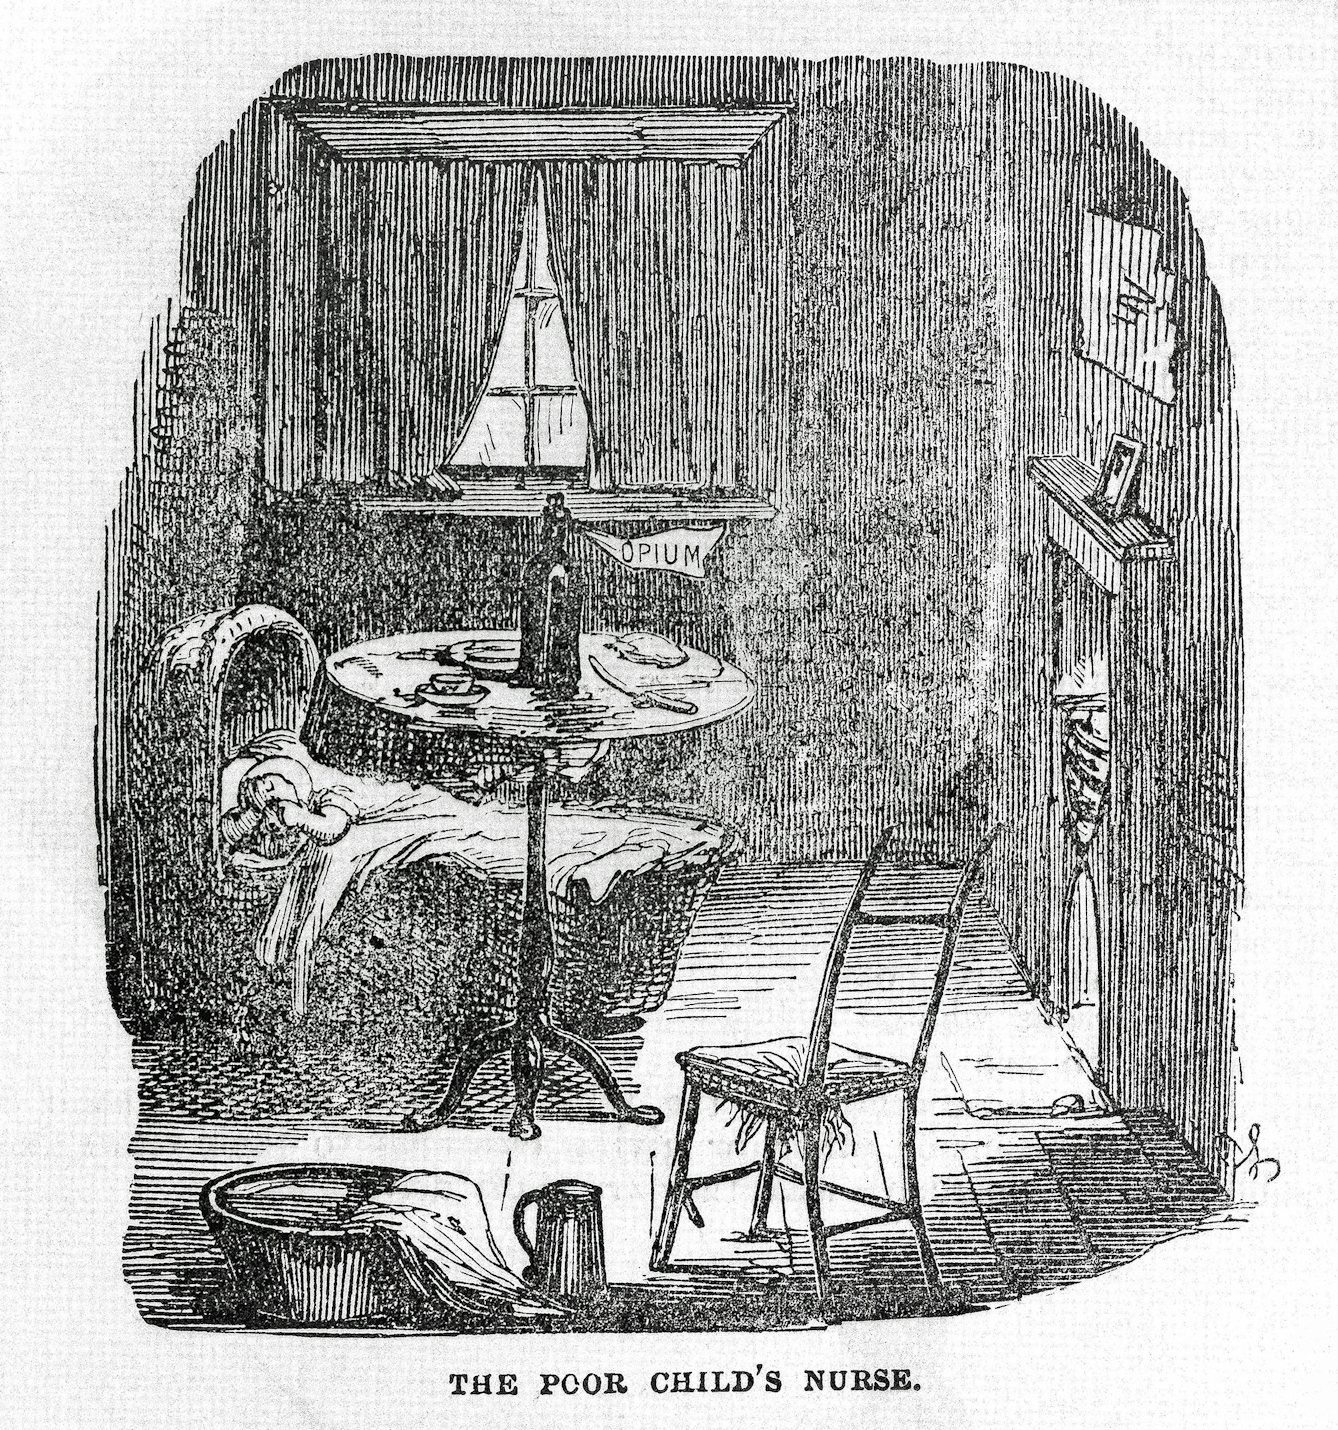 Print of a crying baby in a cot with a bottle of opium on the table